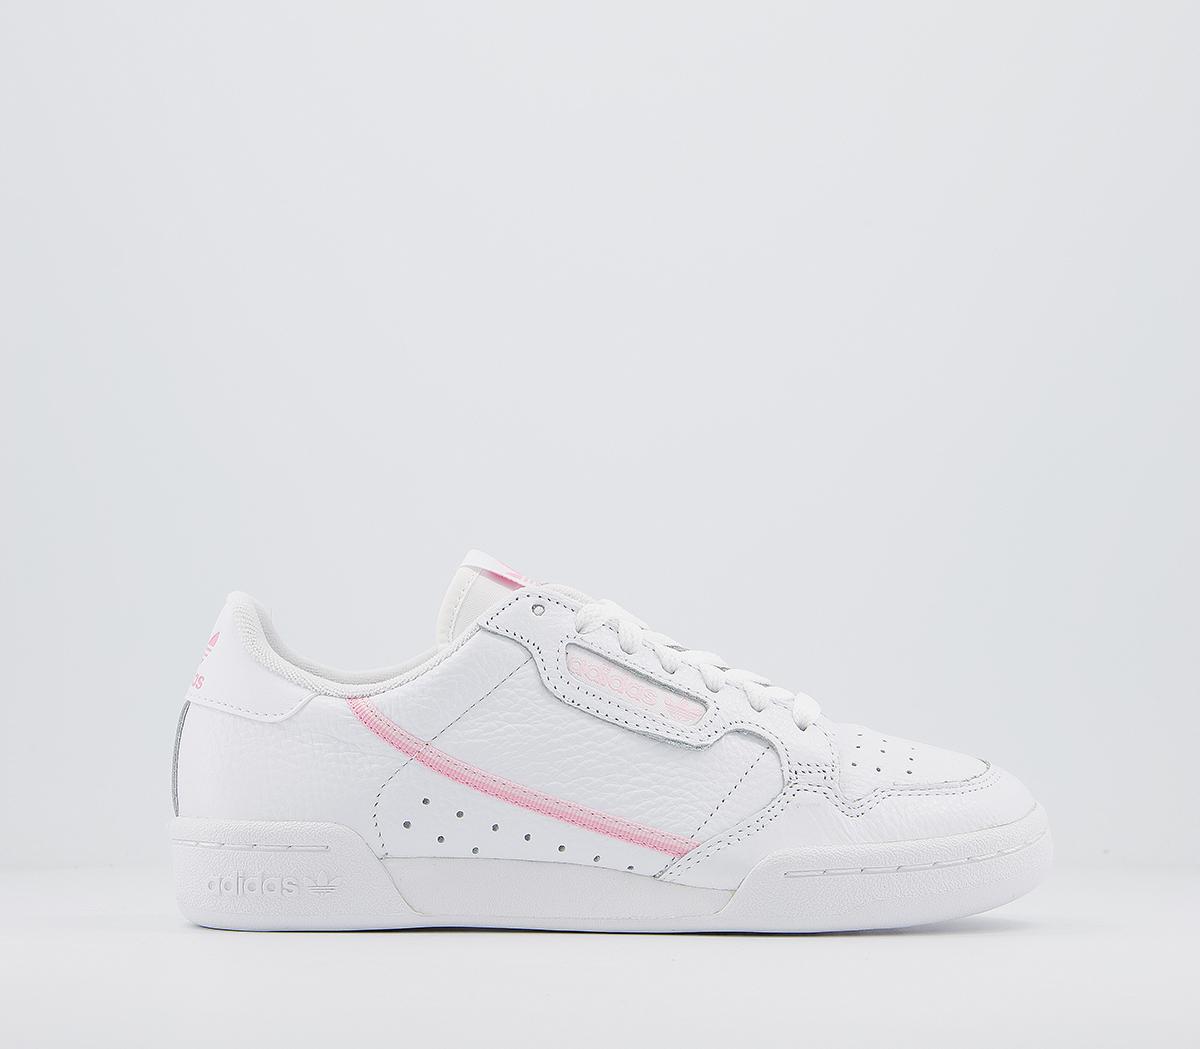 adidas originals continental 80's trainers in pink